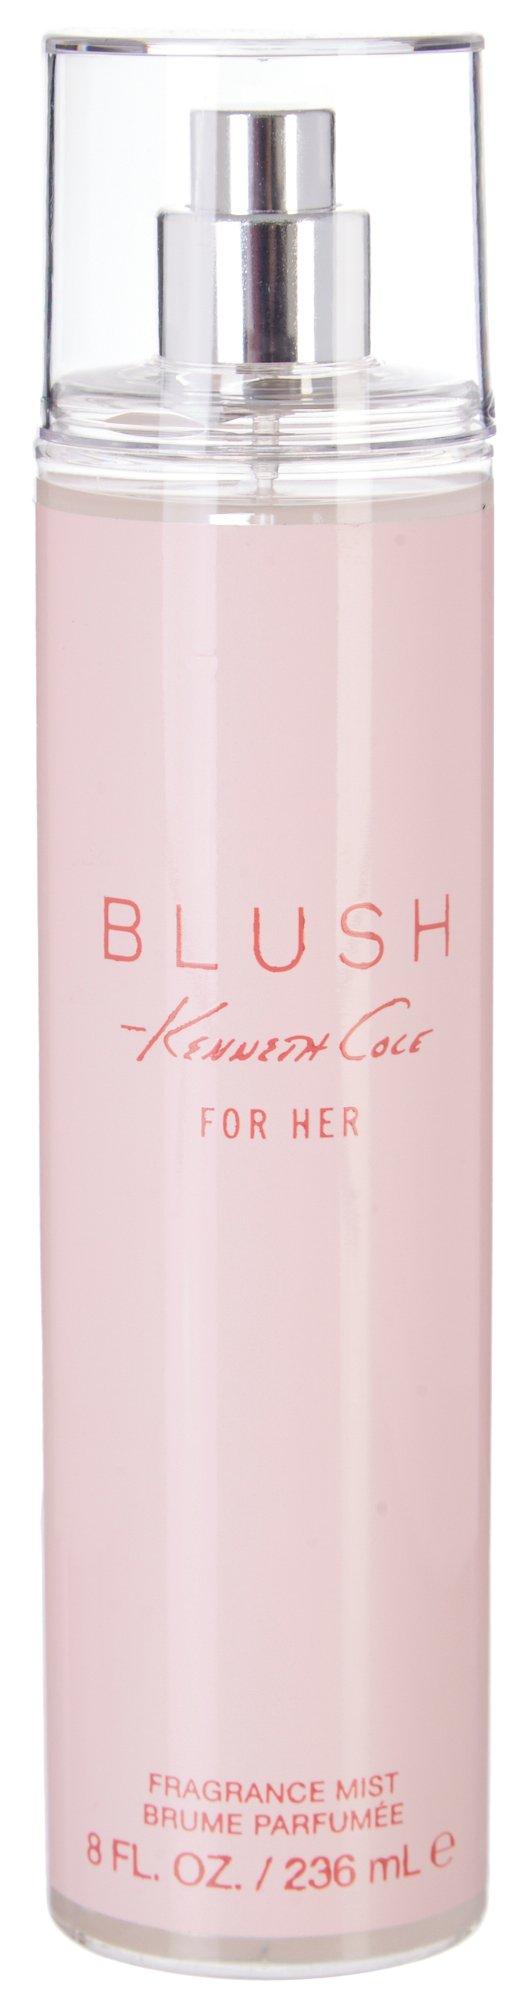 Kenneth Cole Womens Blush For Her Fragrance Mist